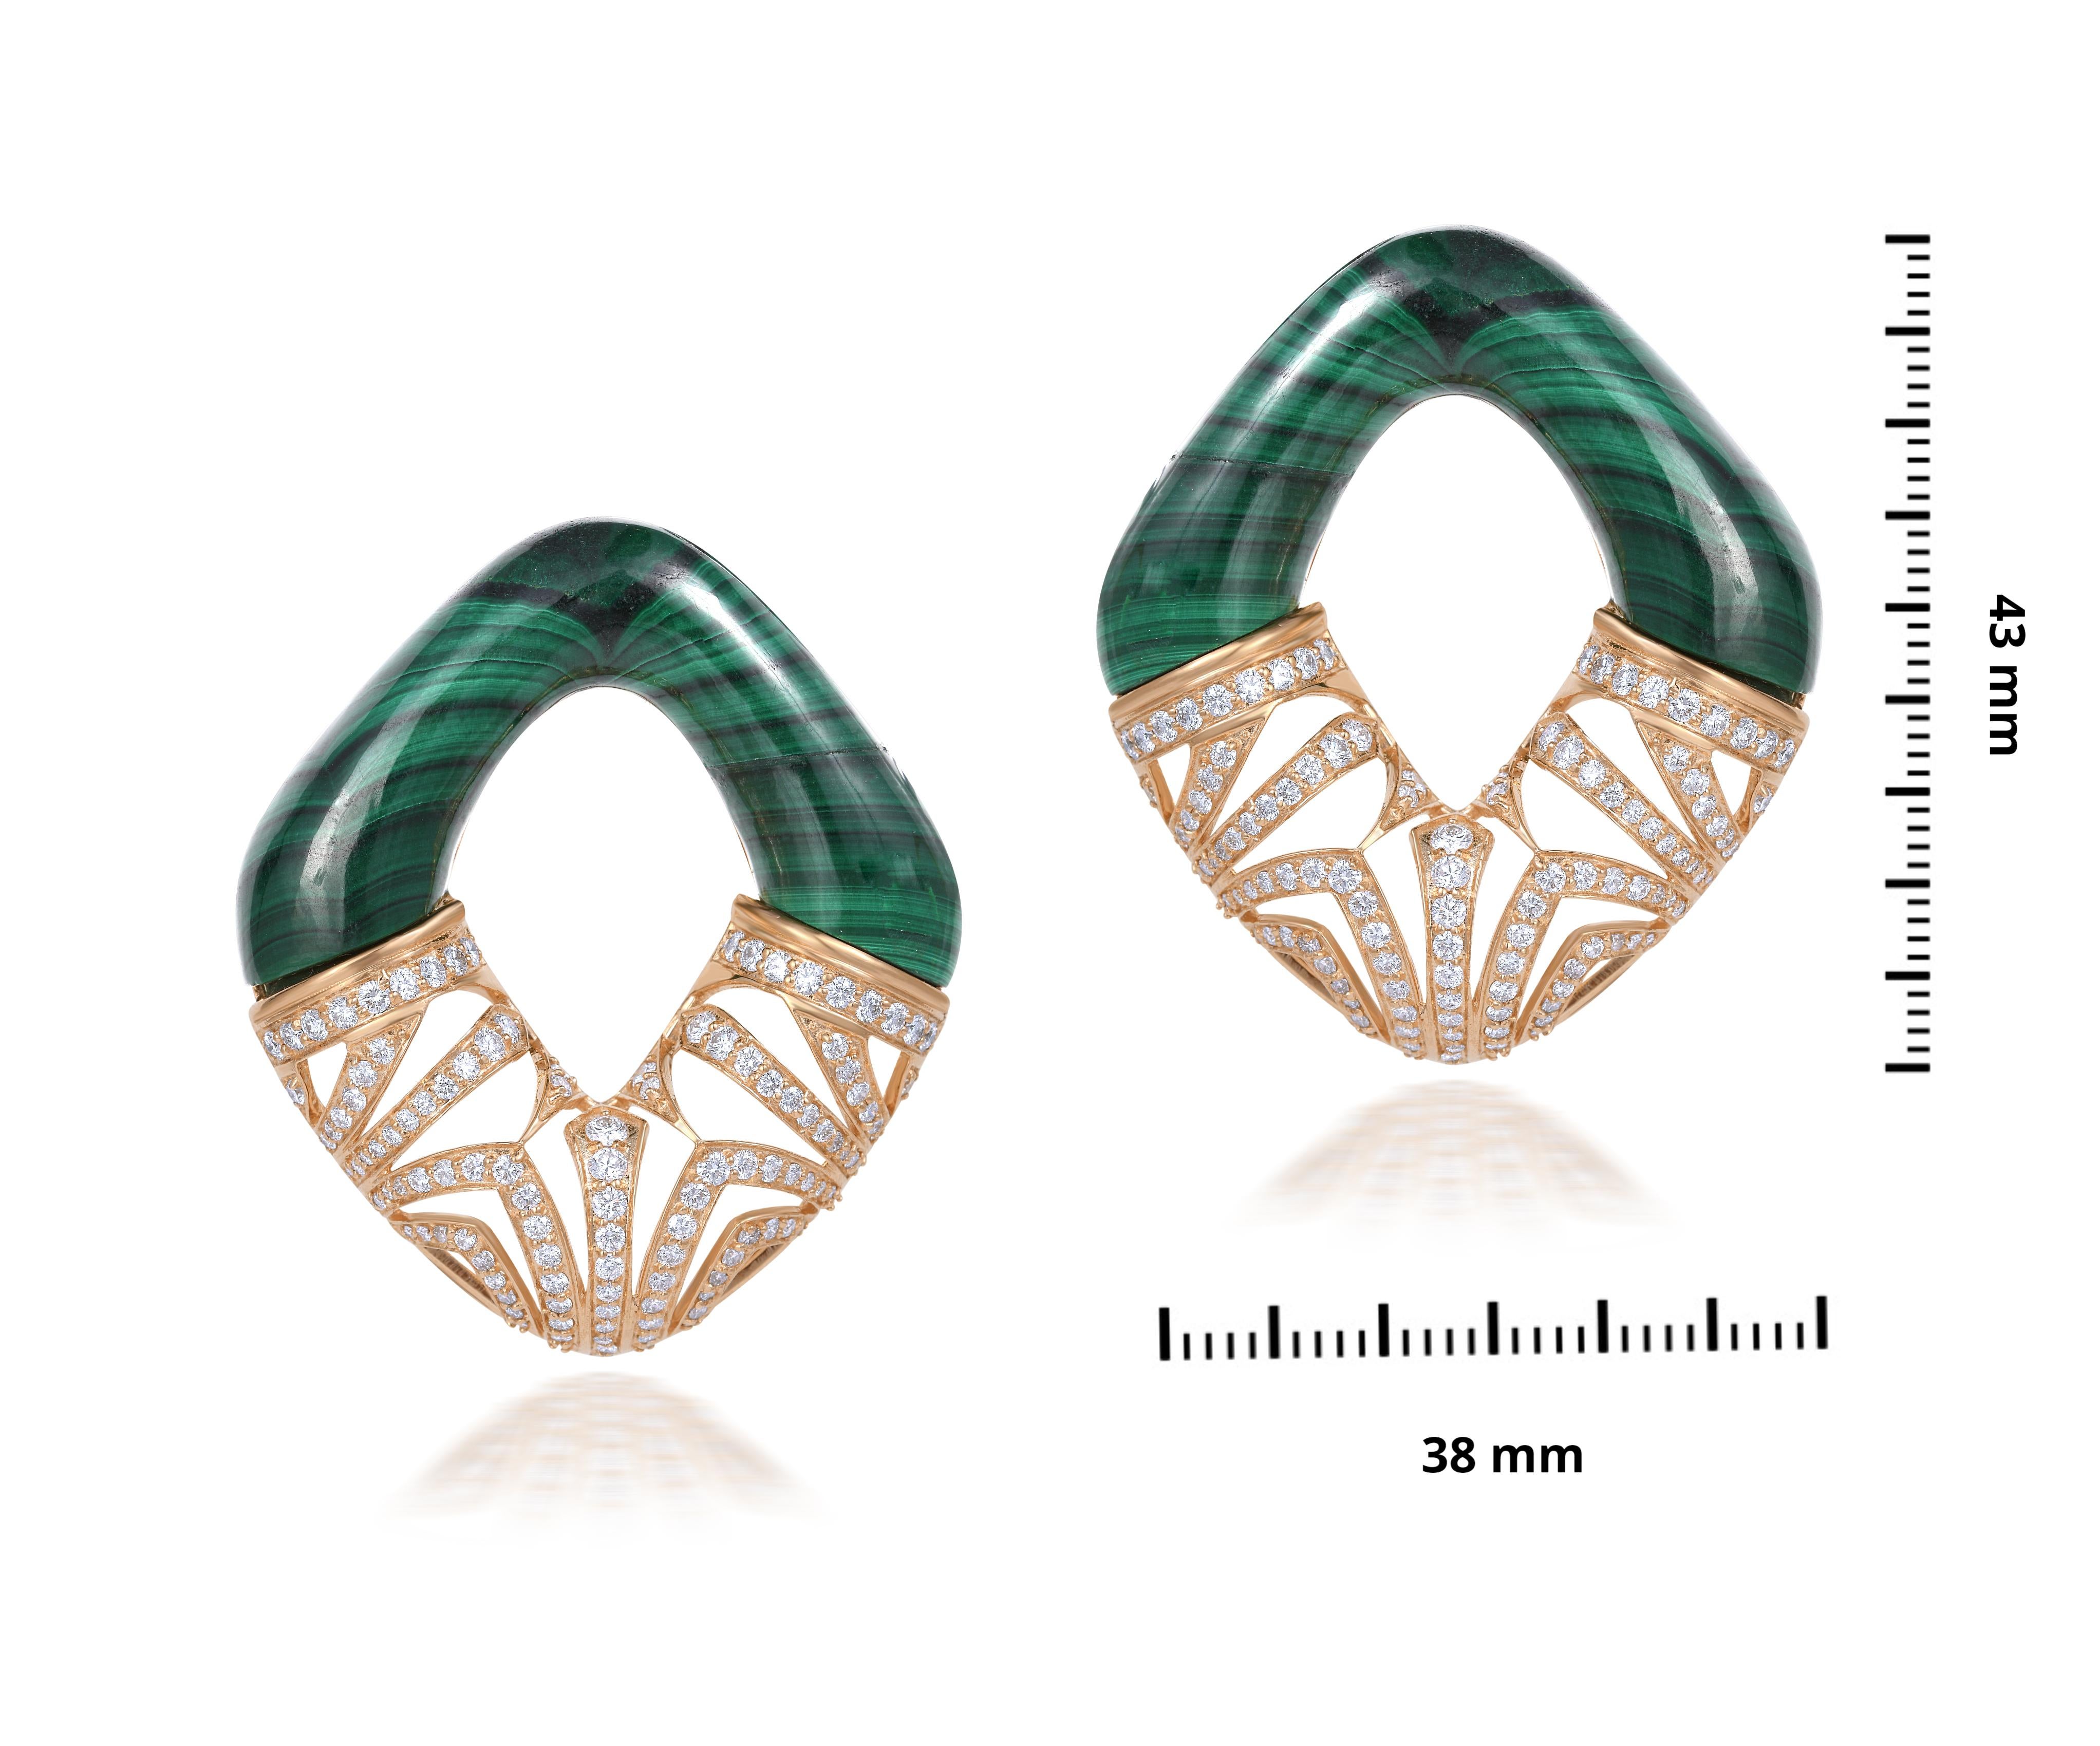 A Pair Of Earrings In Carved Malachite In an Aztec Inspired Diamond Pattern in Yellow Gold 18k . Typical of his style Harshad Ajoomal merges 